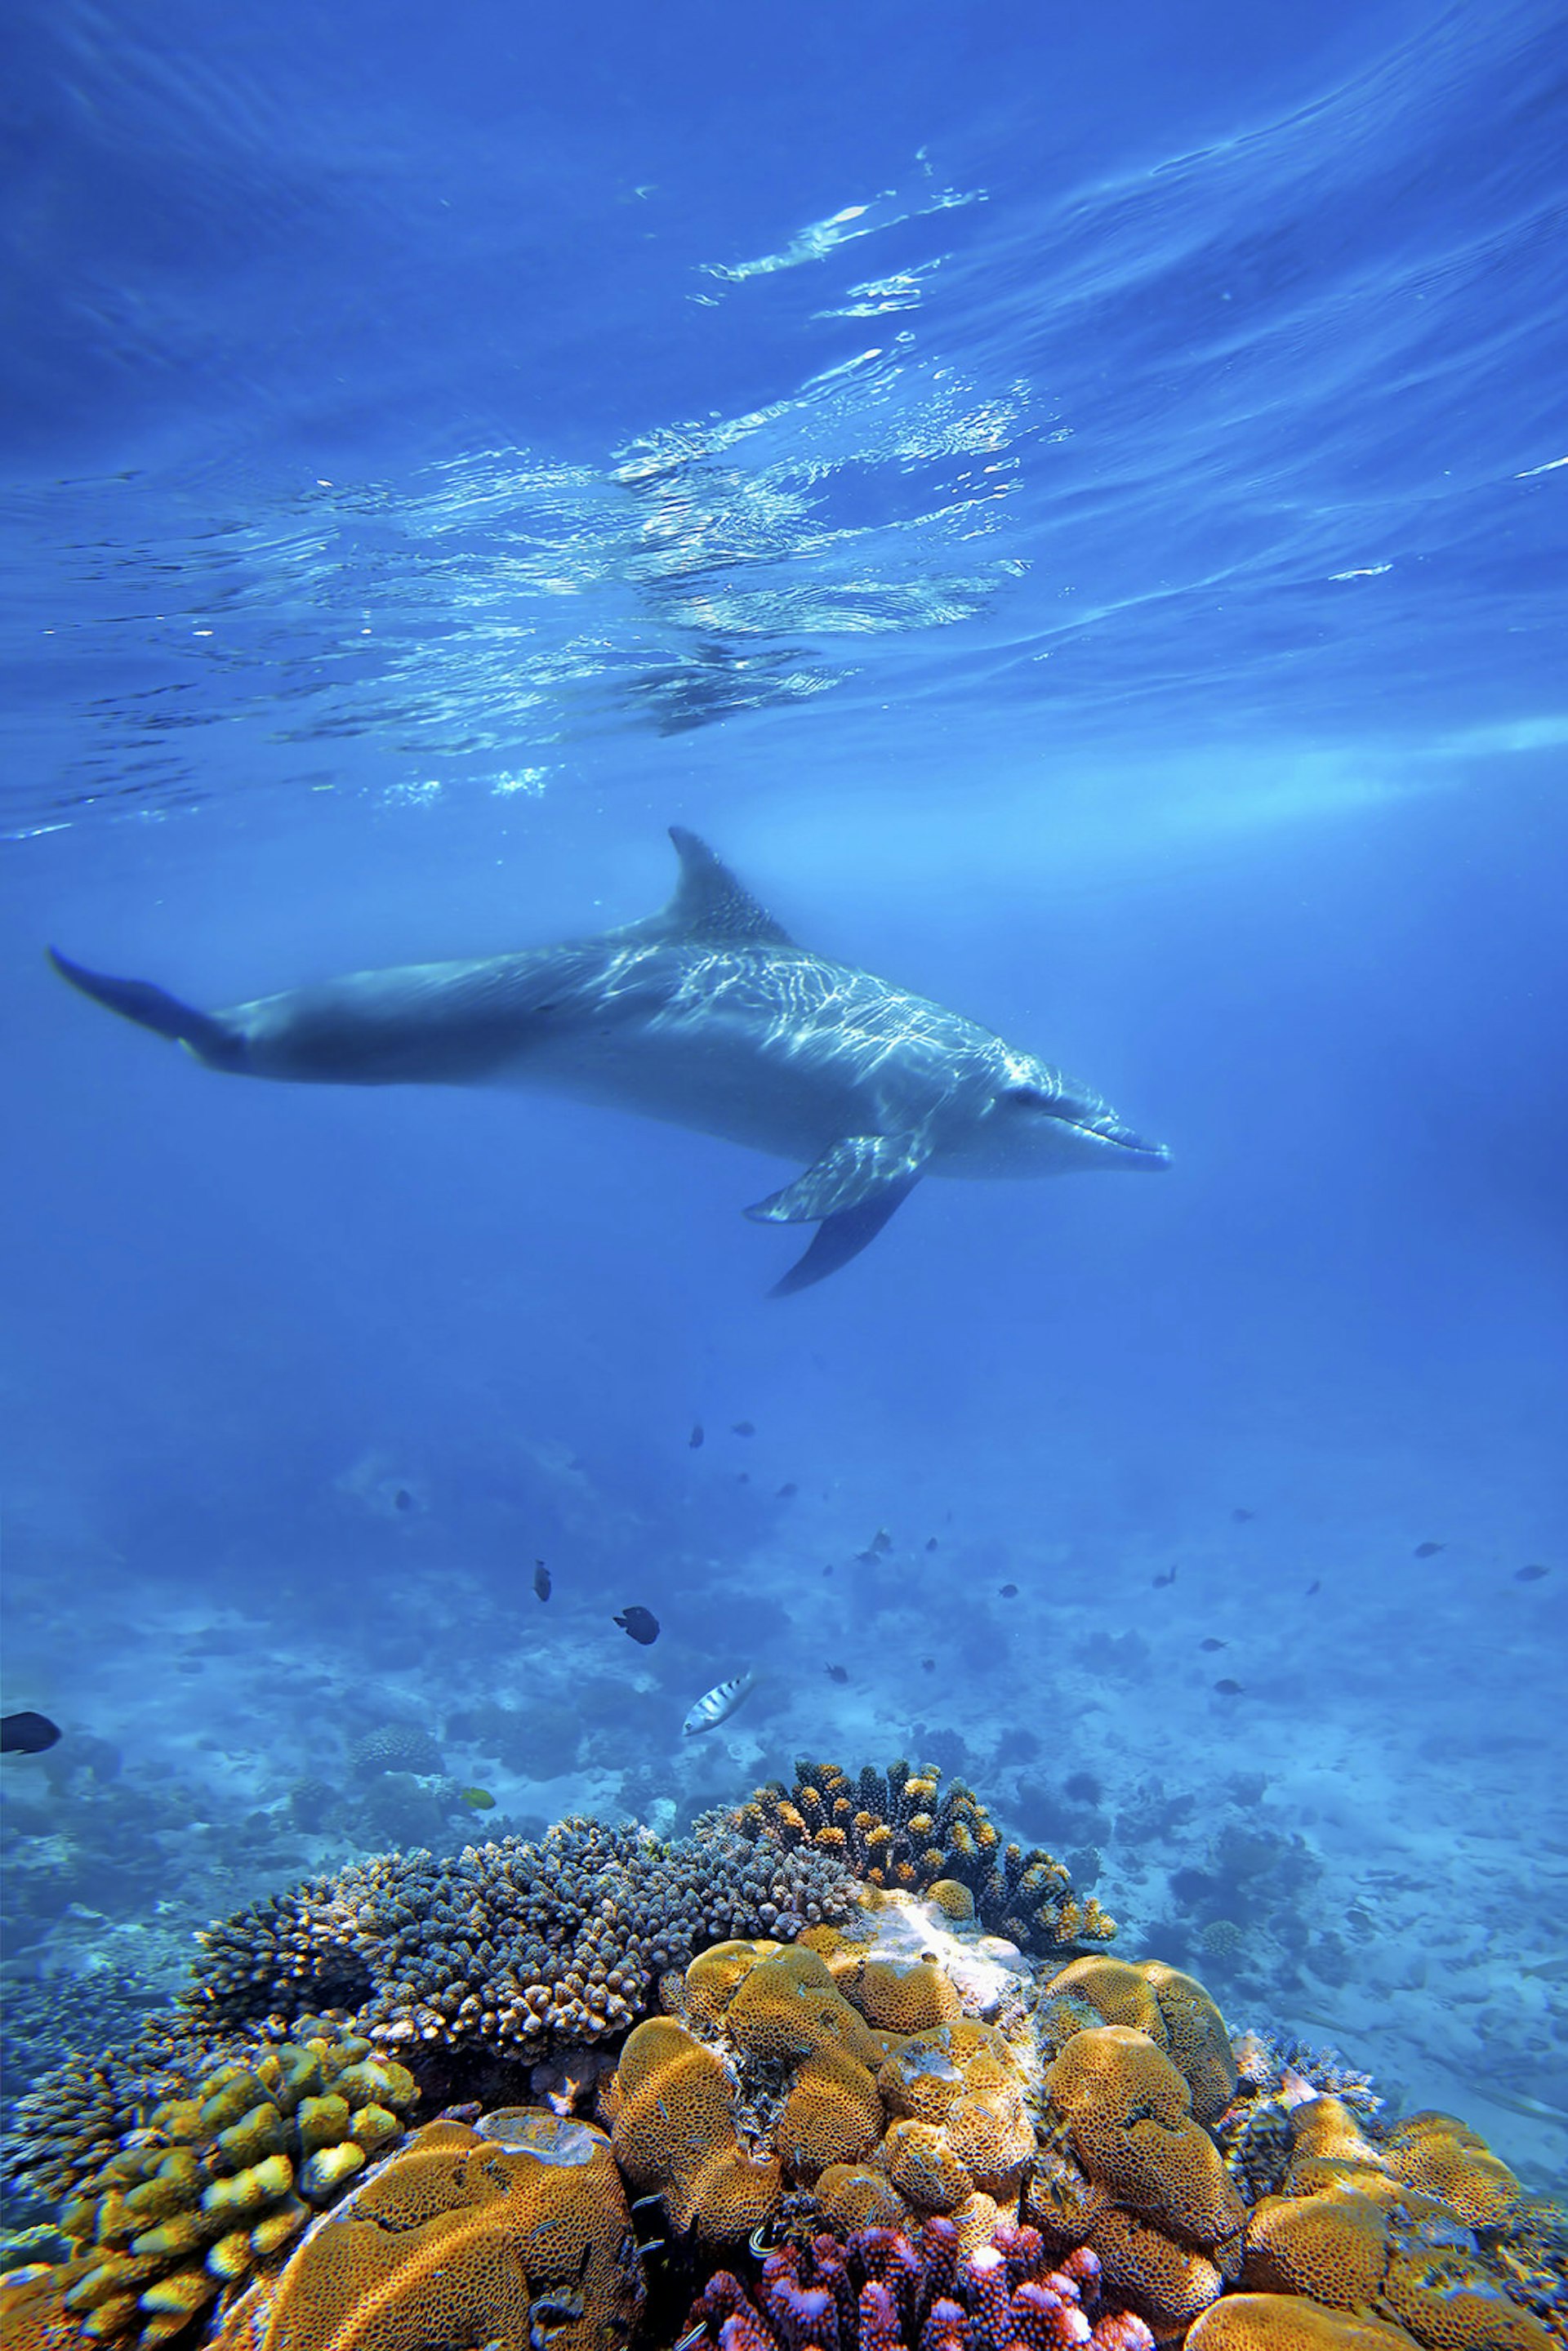 A lone bottlenose dolphin swims above colourful corals in rich blue waters